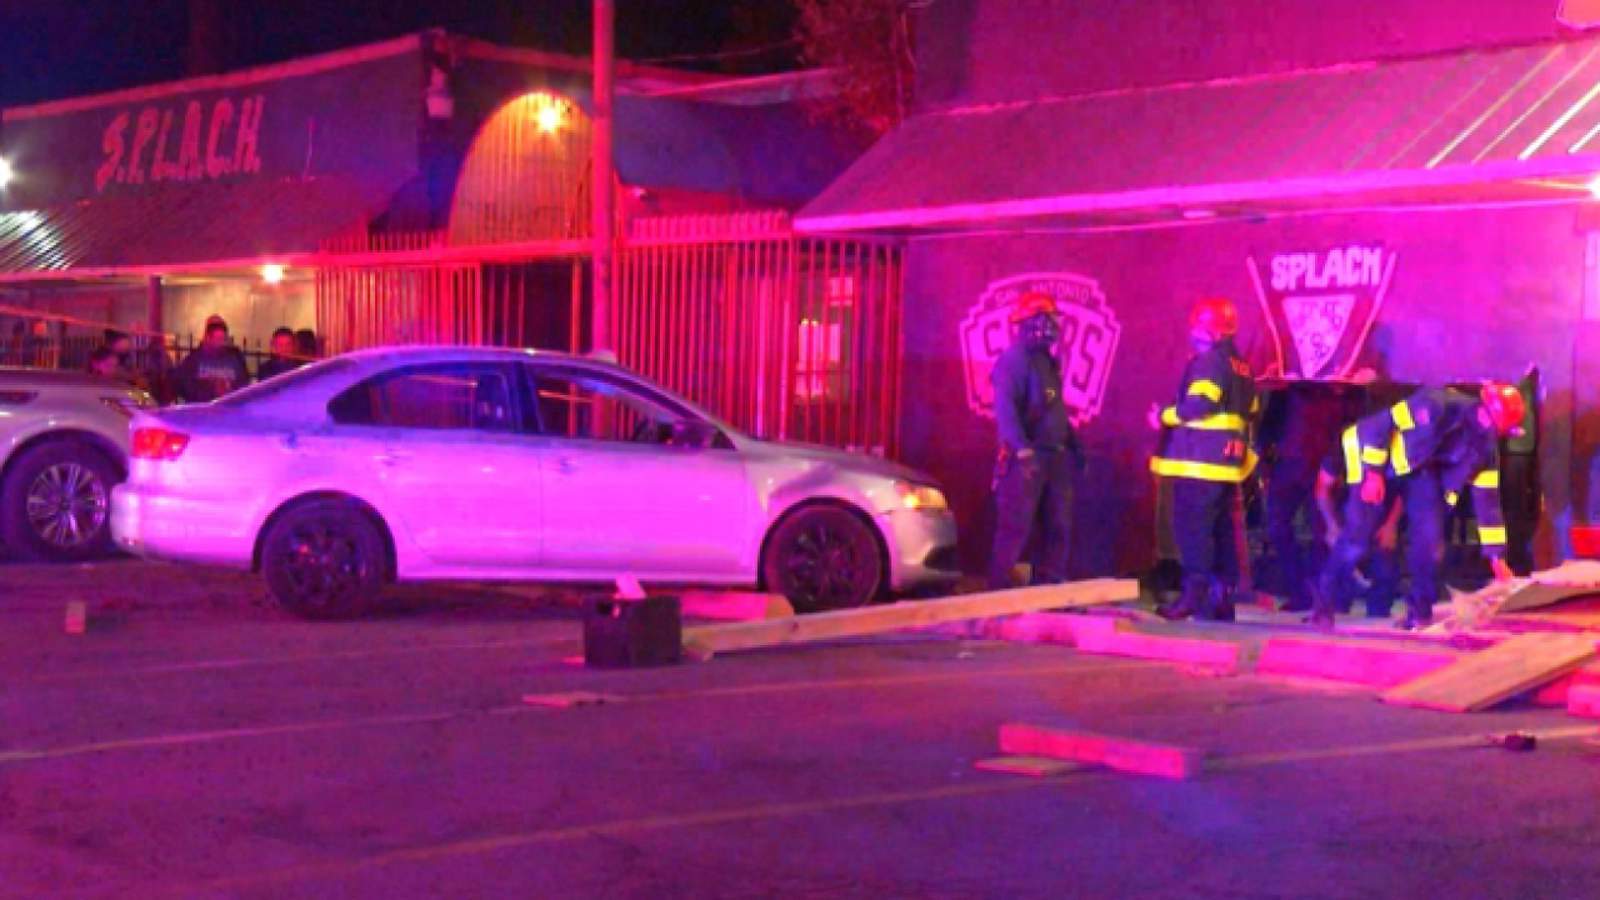 Driver detained after crashing vehicle into South Side bar, police say